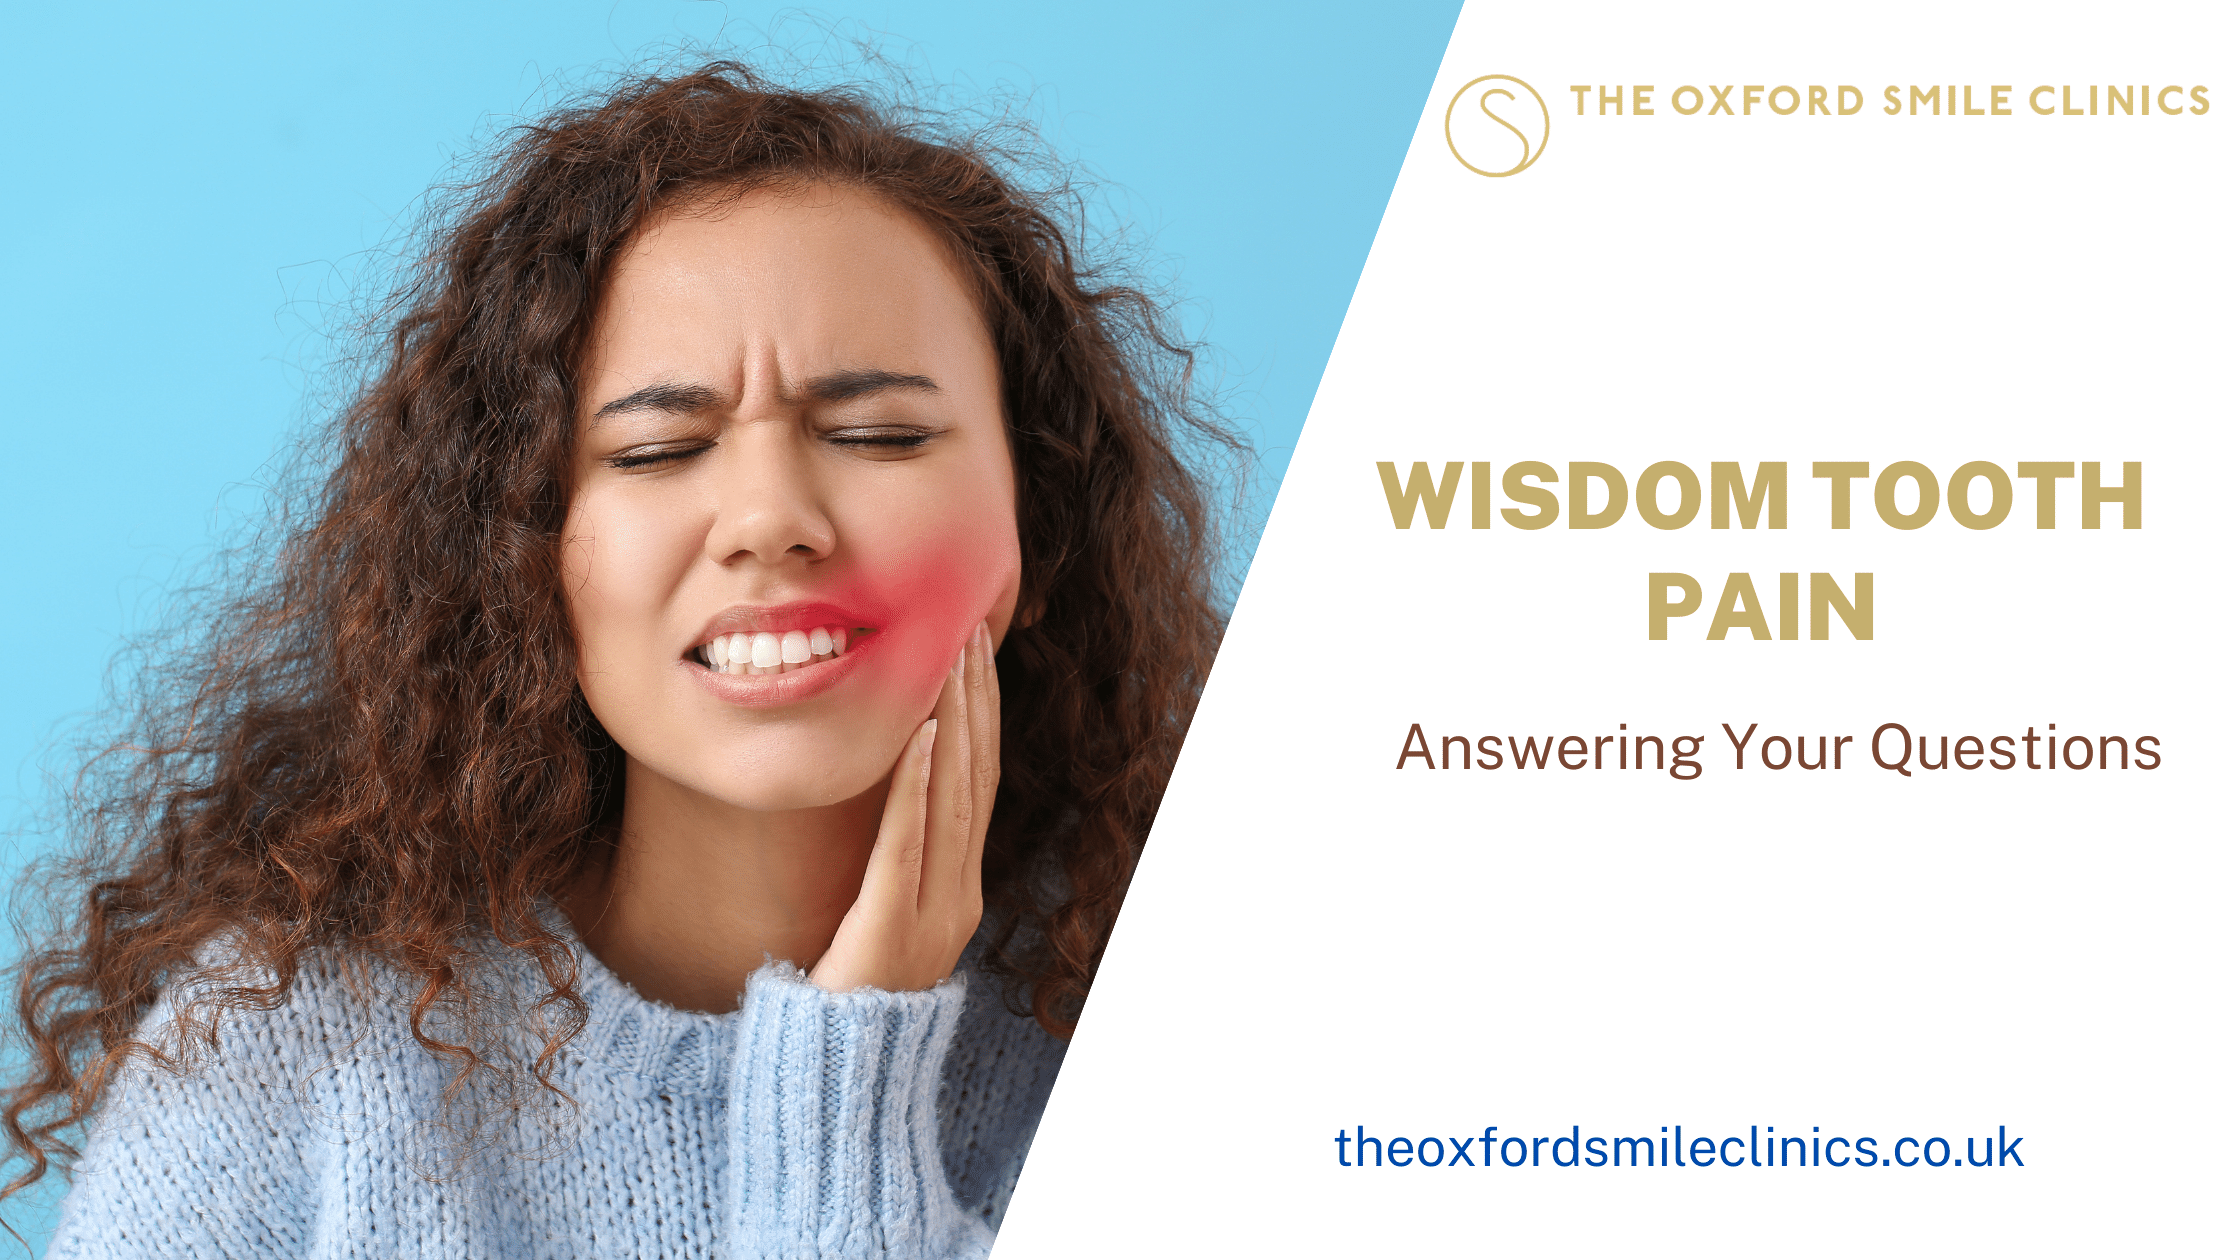 Wisdom Tooth Pain - Answering Your Questions